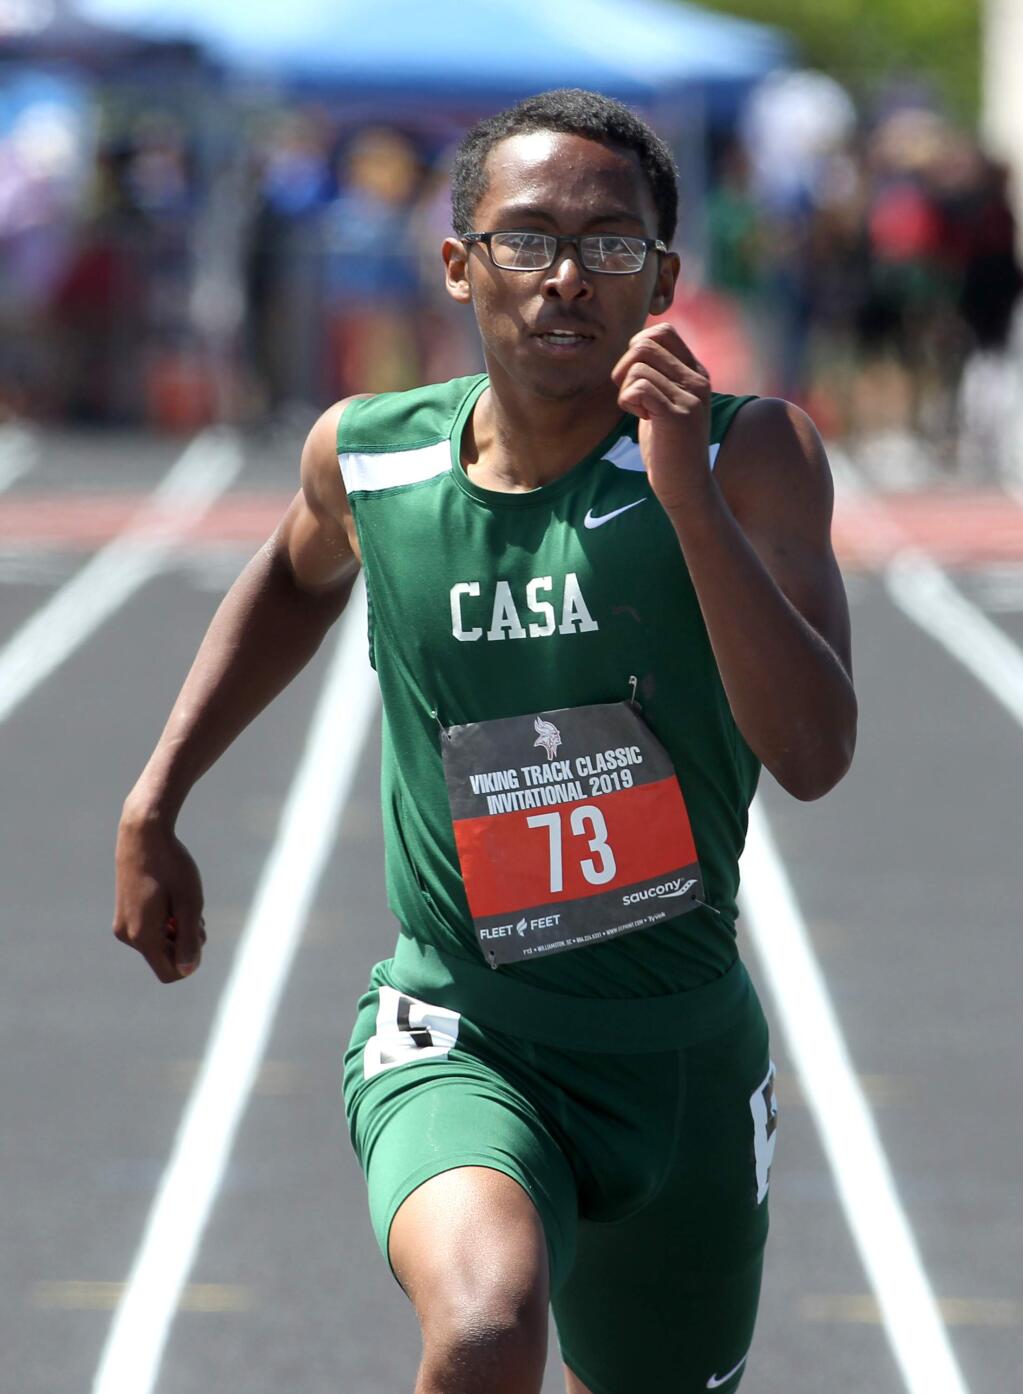 Jalydon Love on his way to winning the 400-meter dash heat during the Viking Track Classic at Montgomery High School in Santa Rosa, on Saturday, April 20, 2019. (Photo by Darryl Bush / For The Press Democrat)